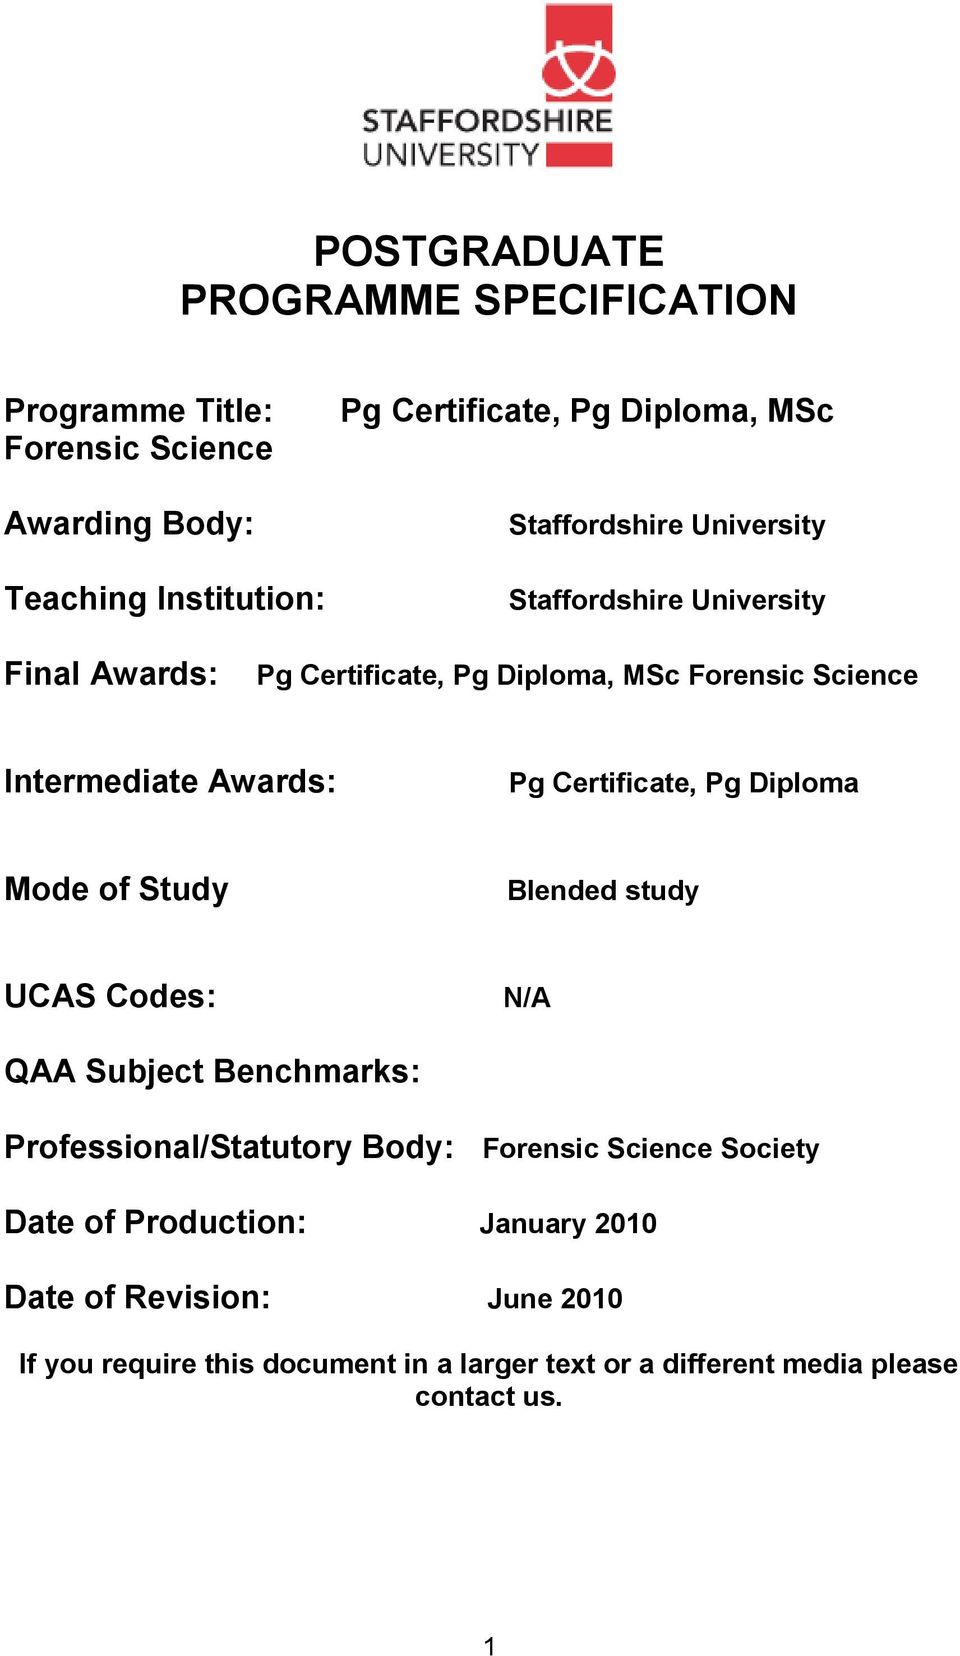 Certificate, Pg Diploma Mode of Study Blended study UCAS Codes: N/A QAA Subject Benchmarks: Professional/Statutory Body: Forensic Science